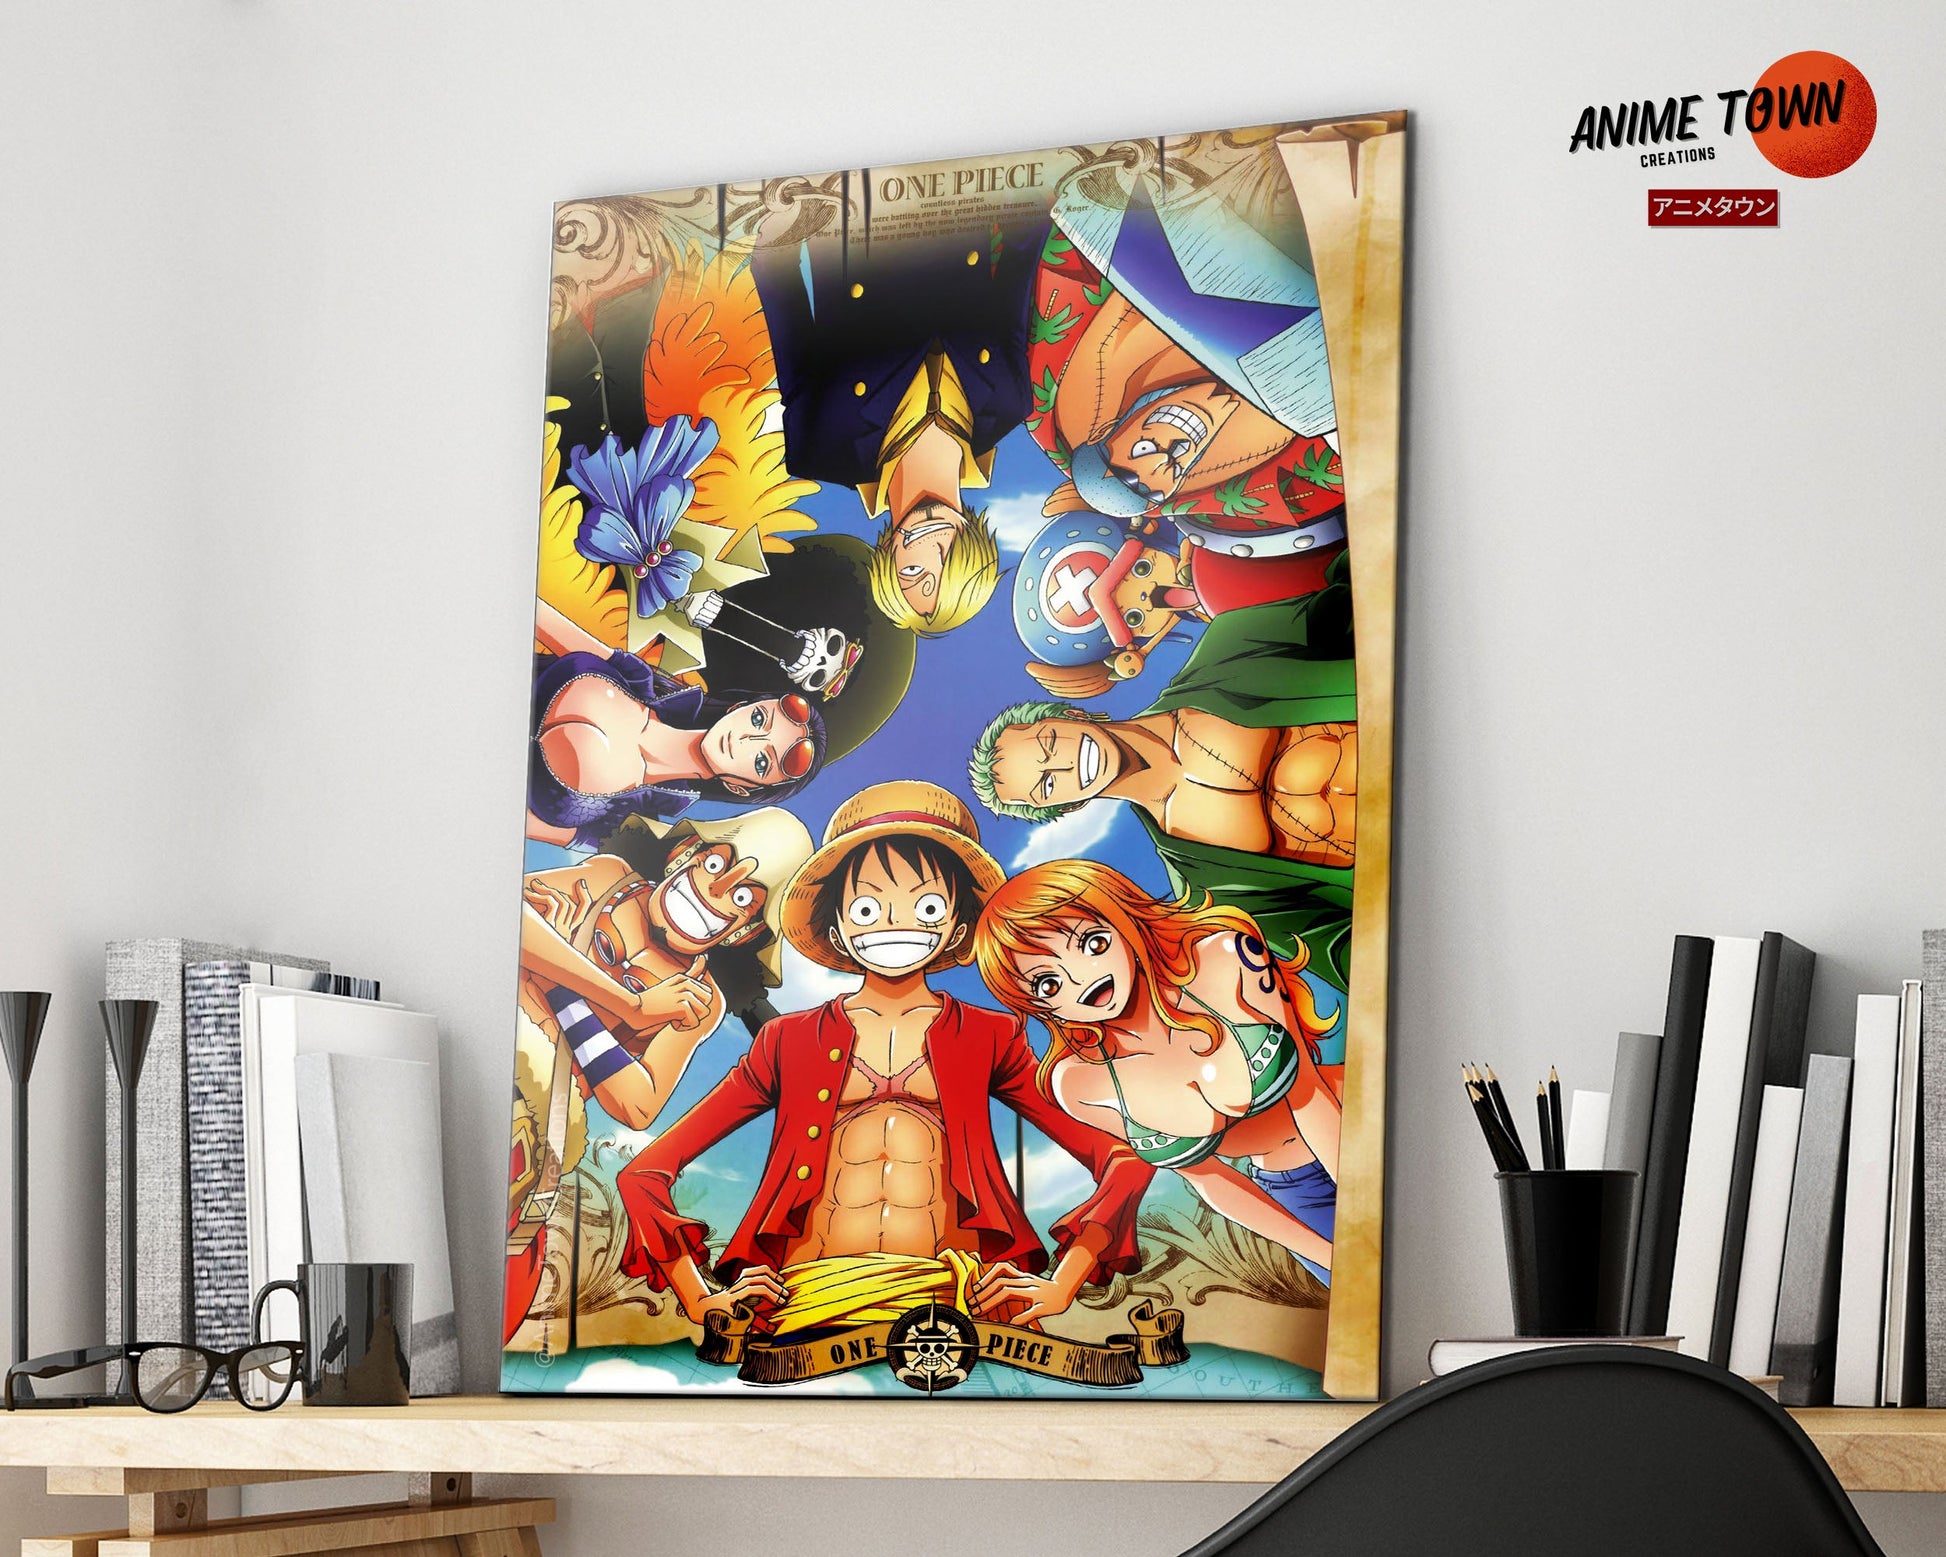 Anime Town Creations Metal Poster One Piece Crew Members 16" x 24" Home Goods - Anime One Piece Metal Poster